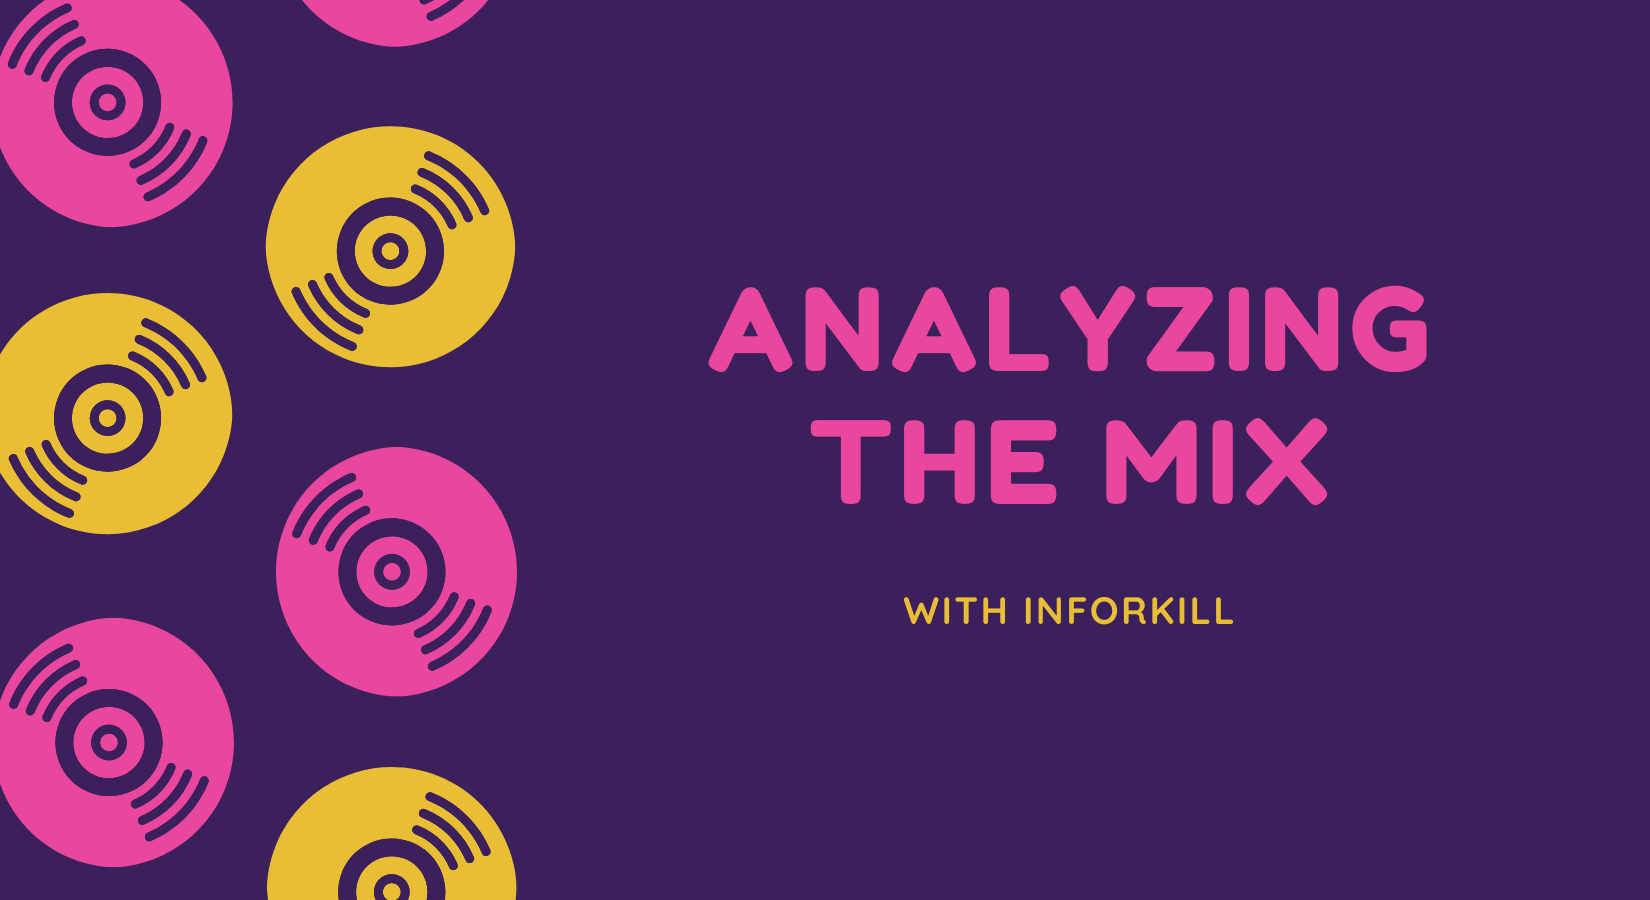 Analyzing the mix with inforkill